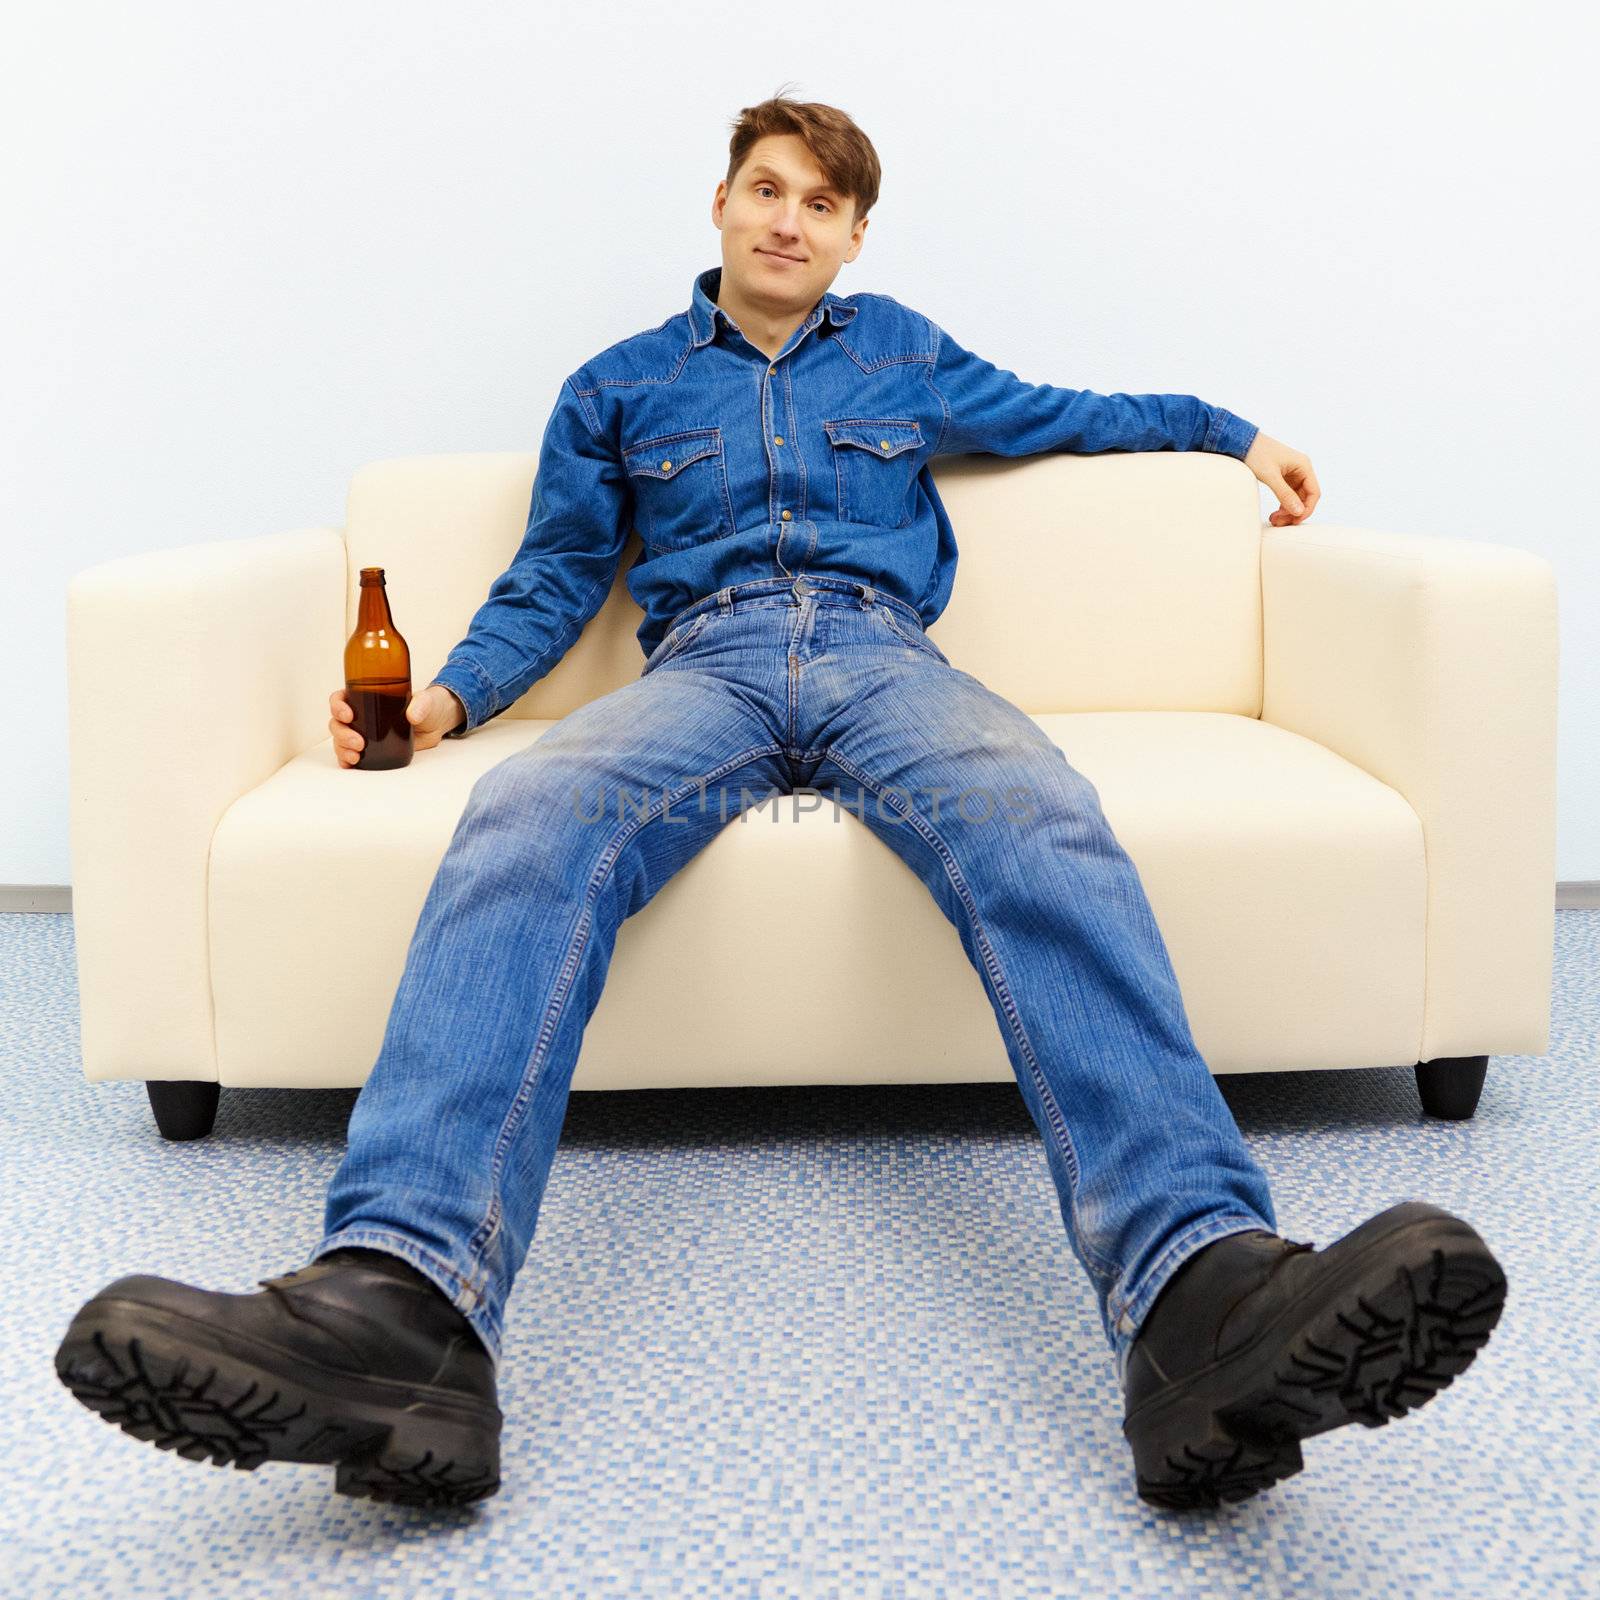 Normal inhabitant resting at home with a beer